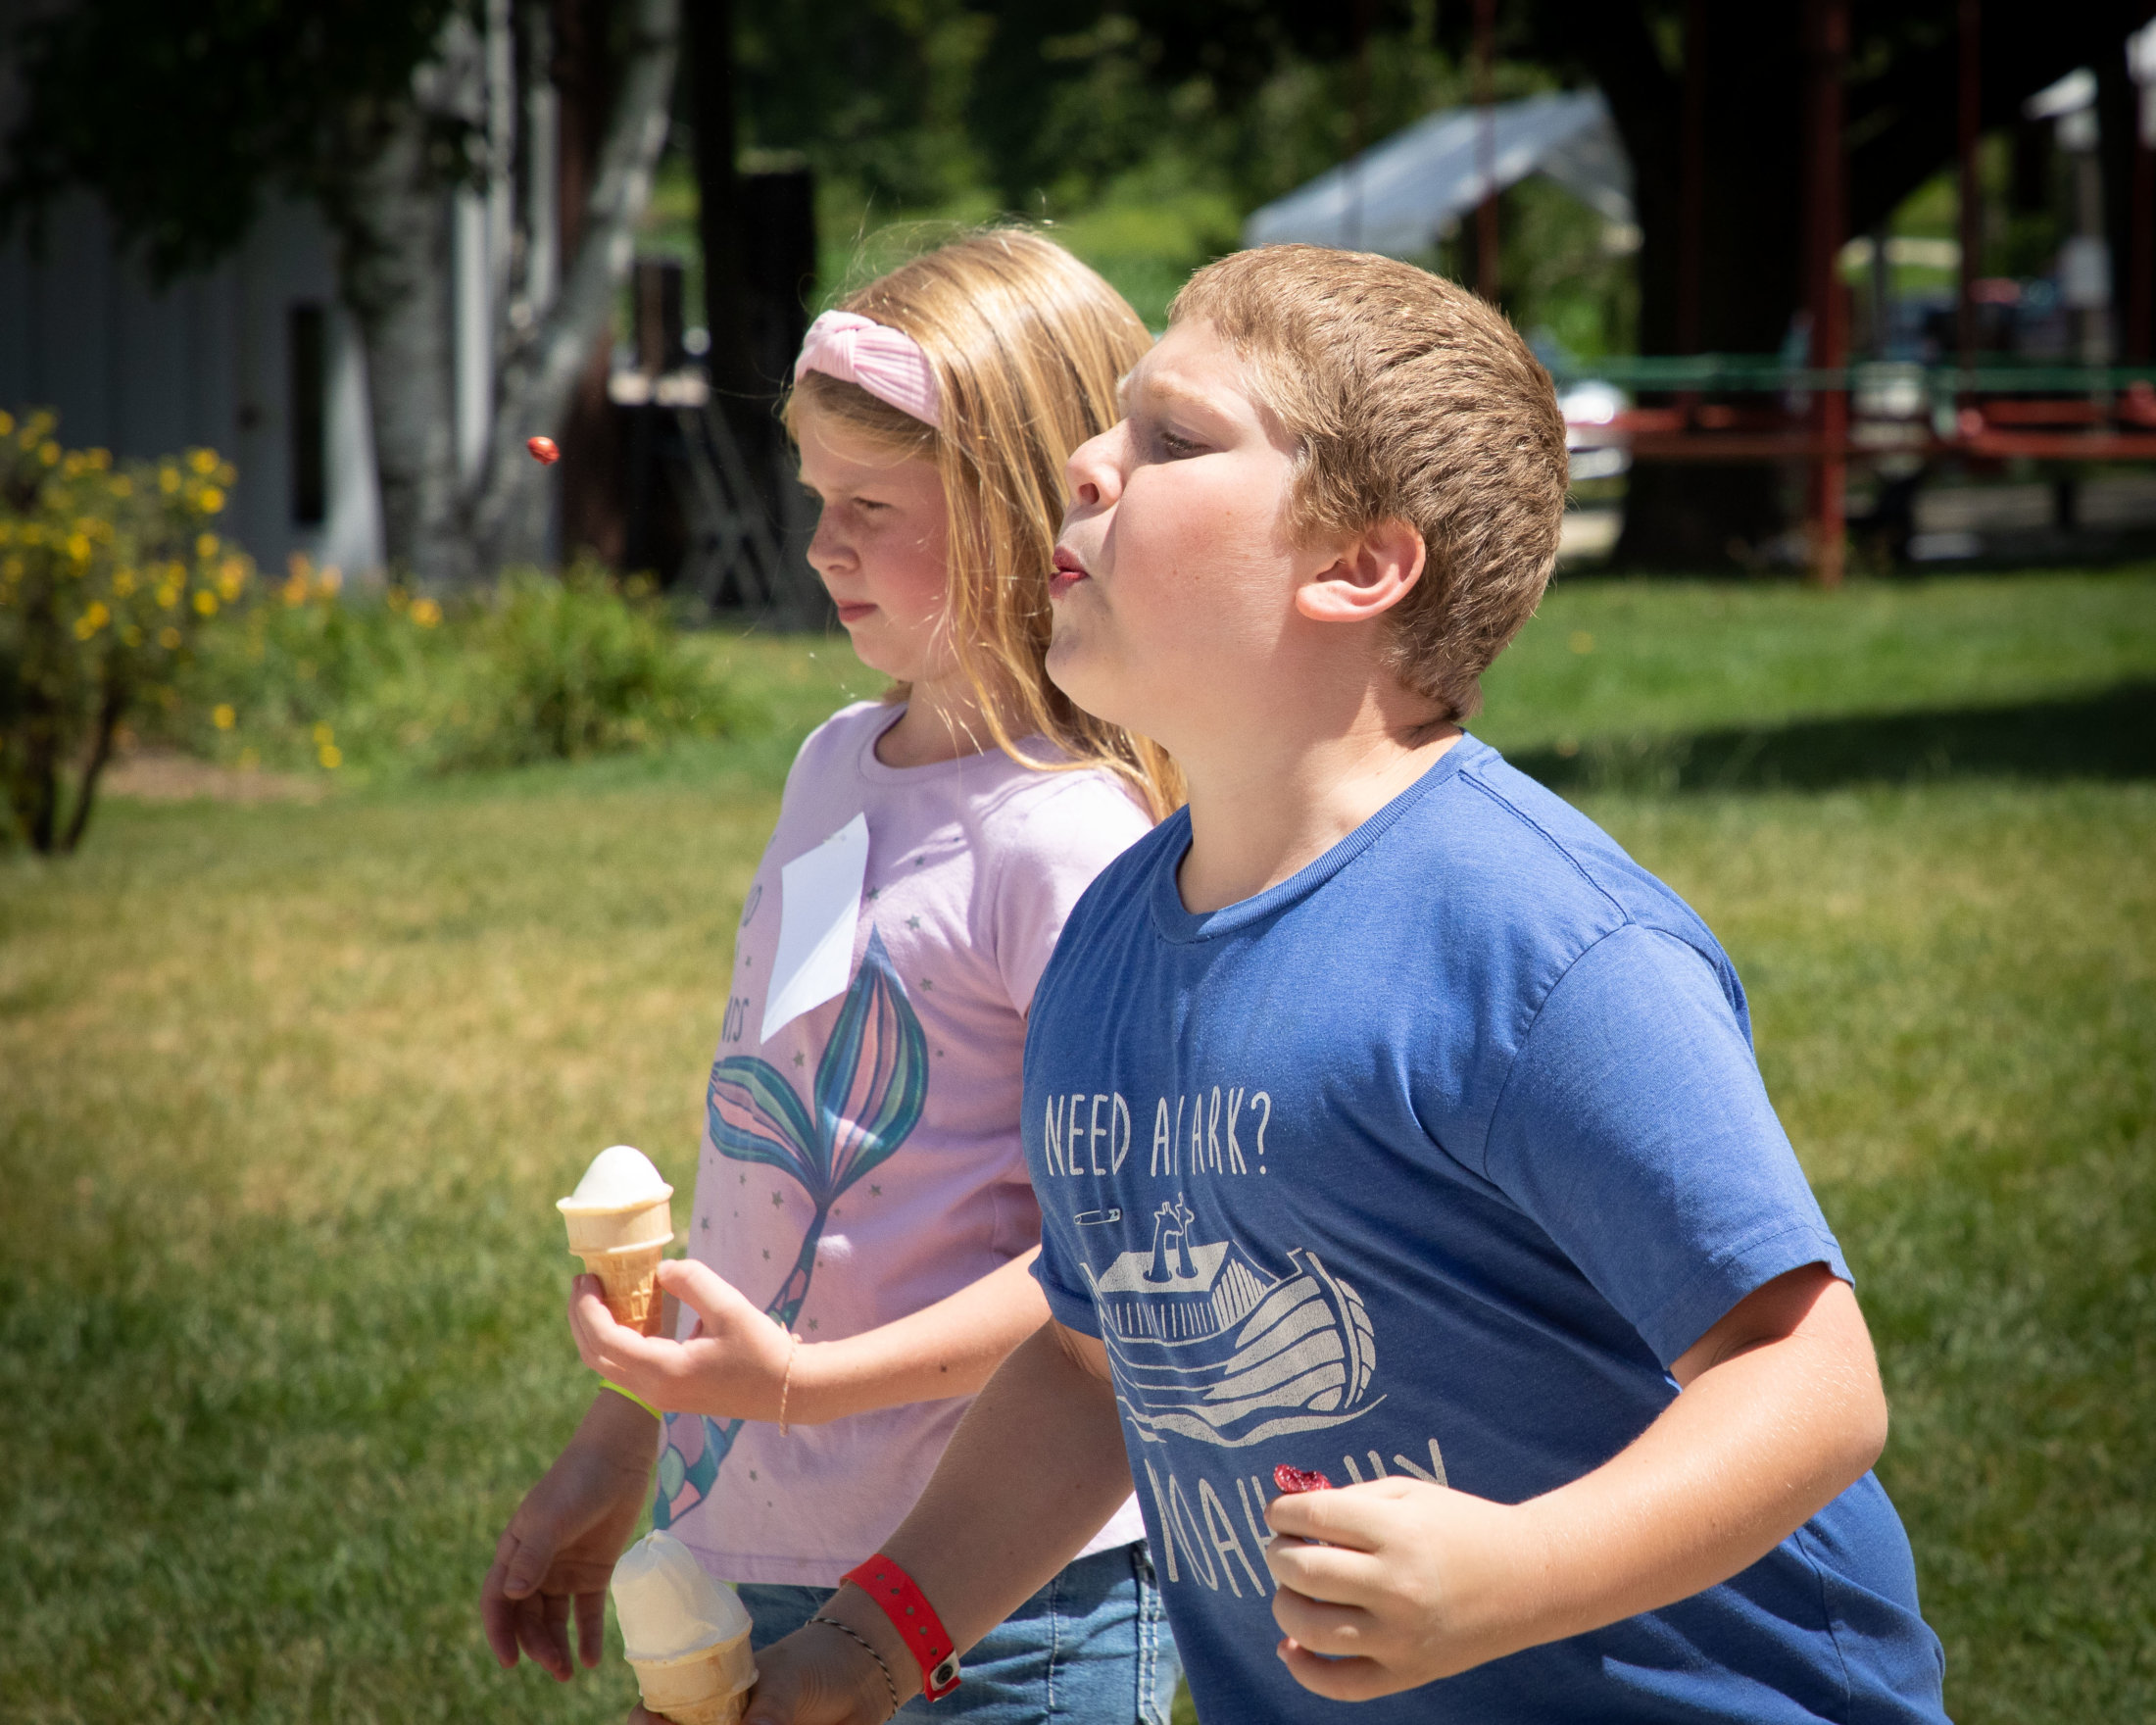 Talented: Cherry Pit Spit Contest while eating Ice Cream 